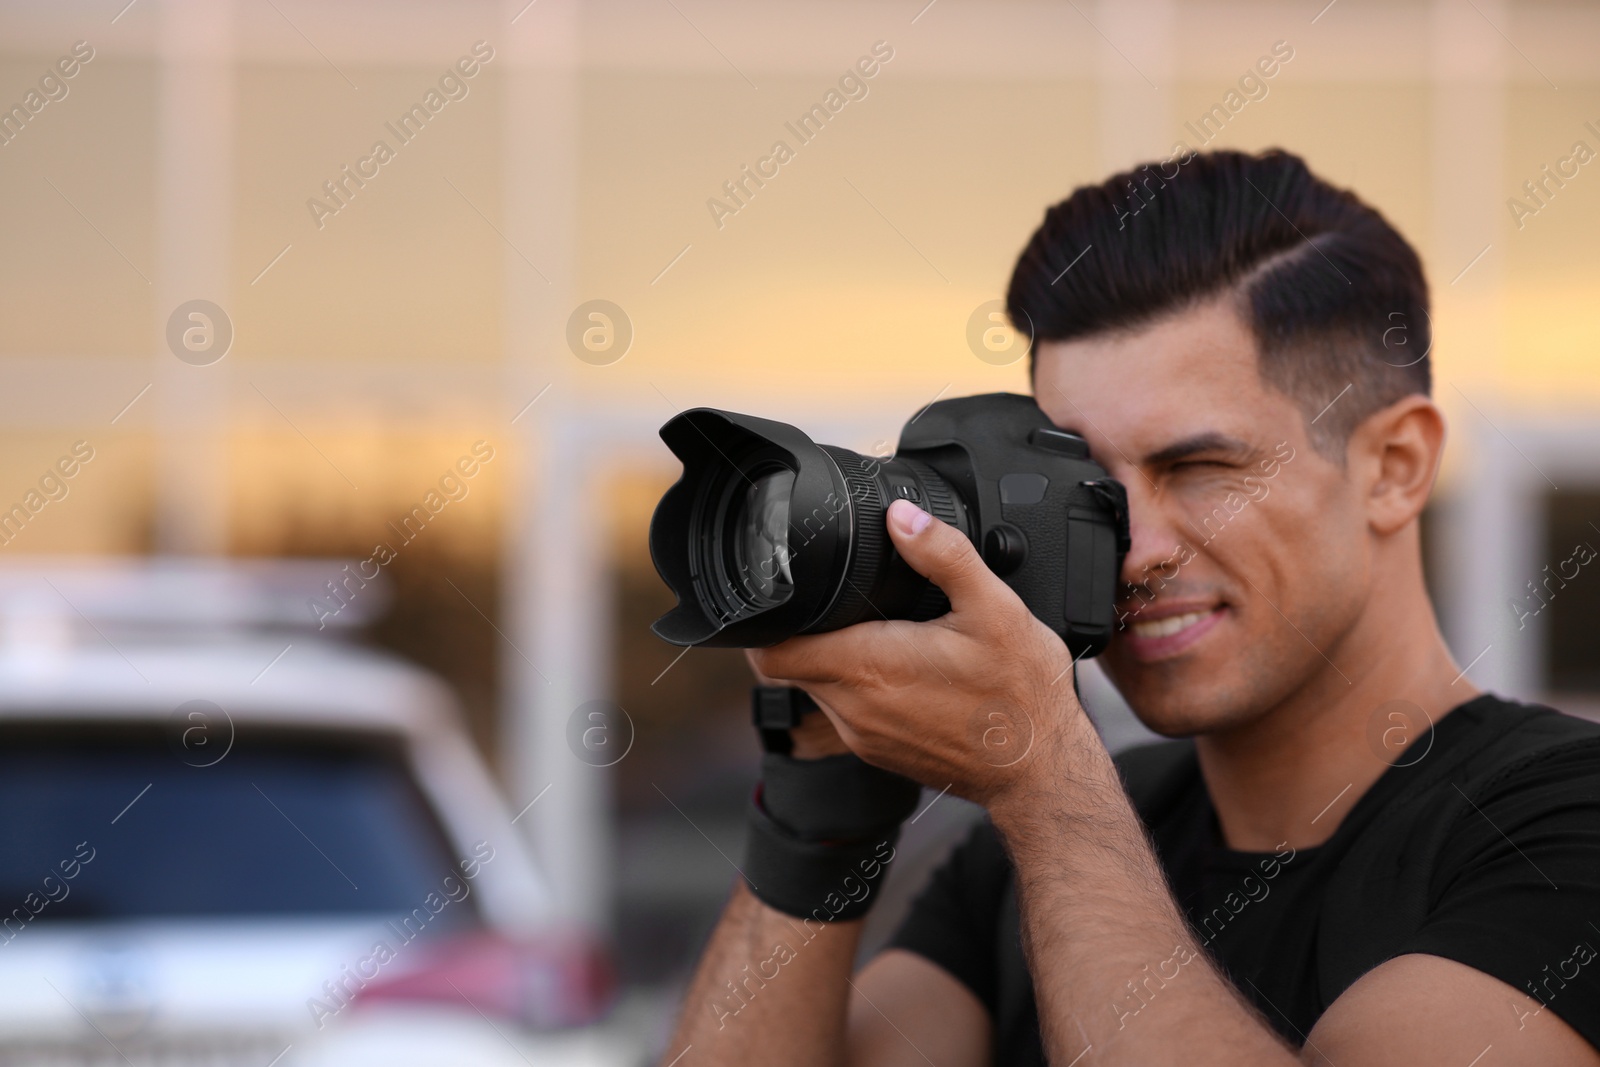 Photo of Photographer taking picture with professional camera outdoors at sunset